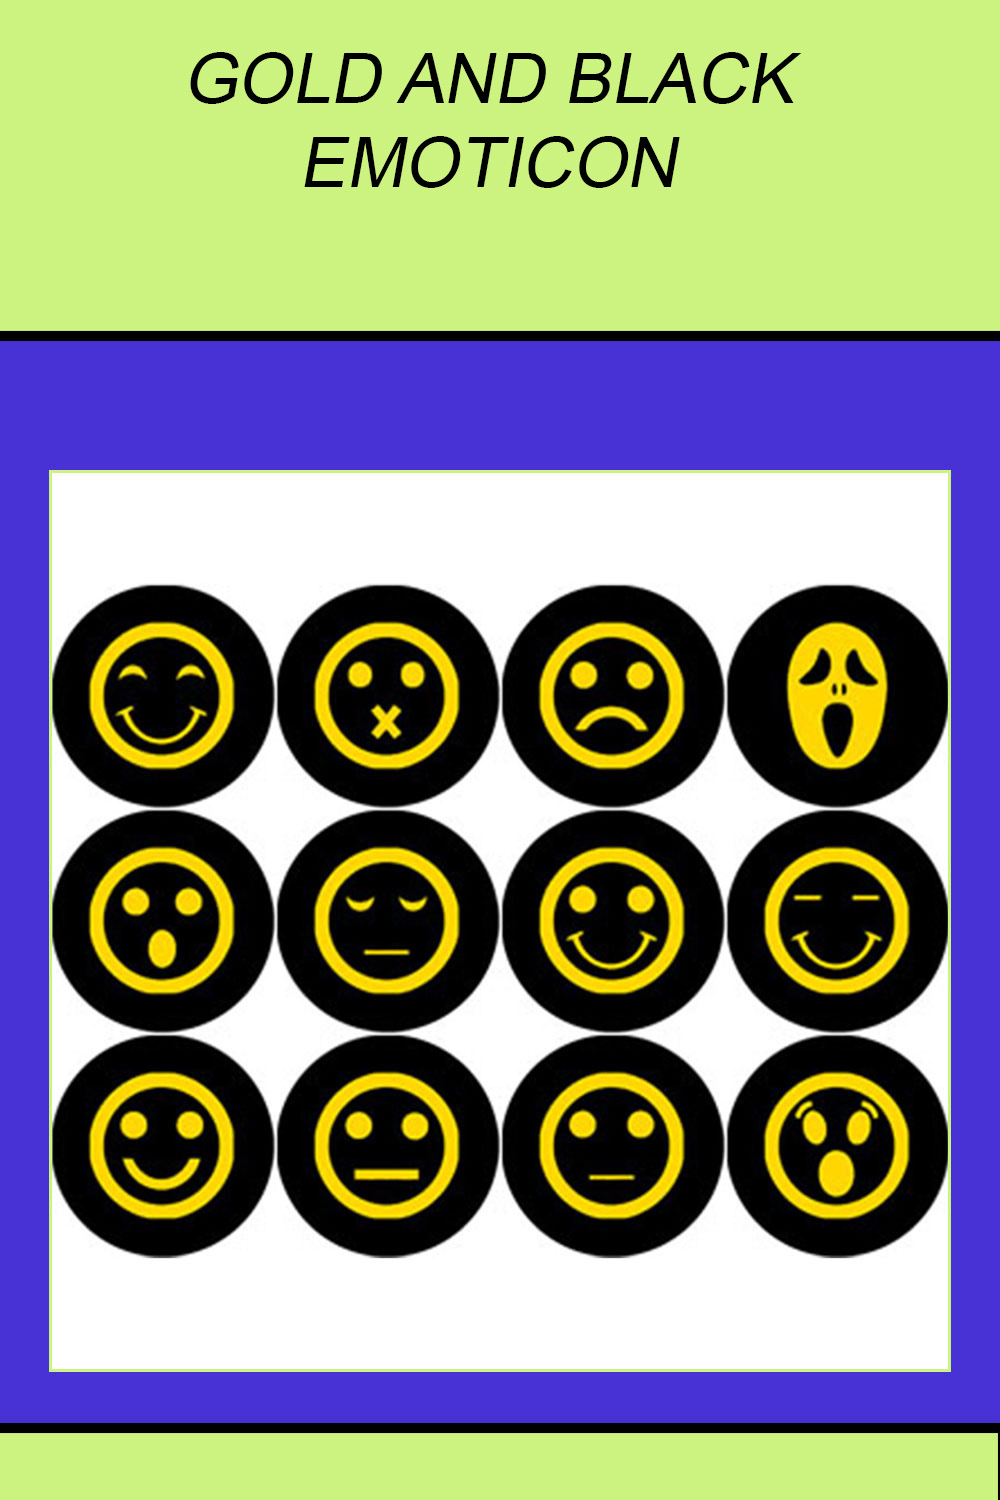 GOLD AND BLACK EMOTICON ROUND ICONS pinterest preview image.